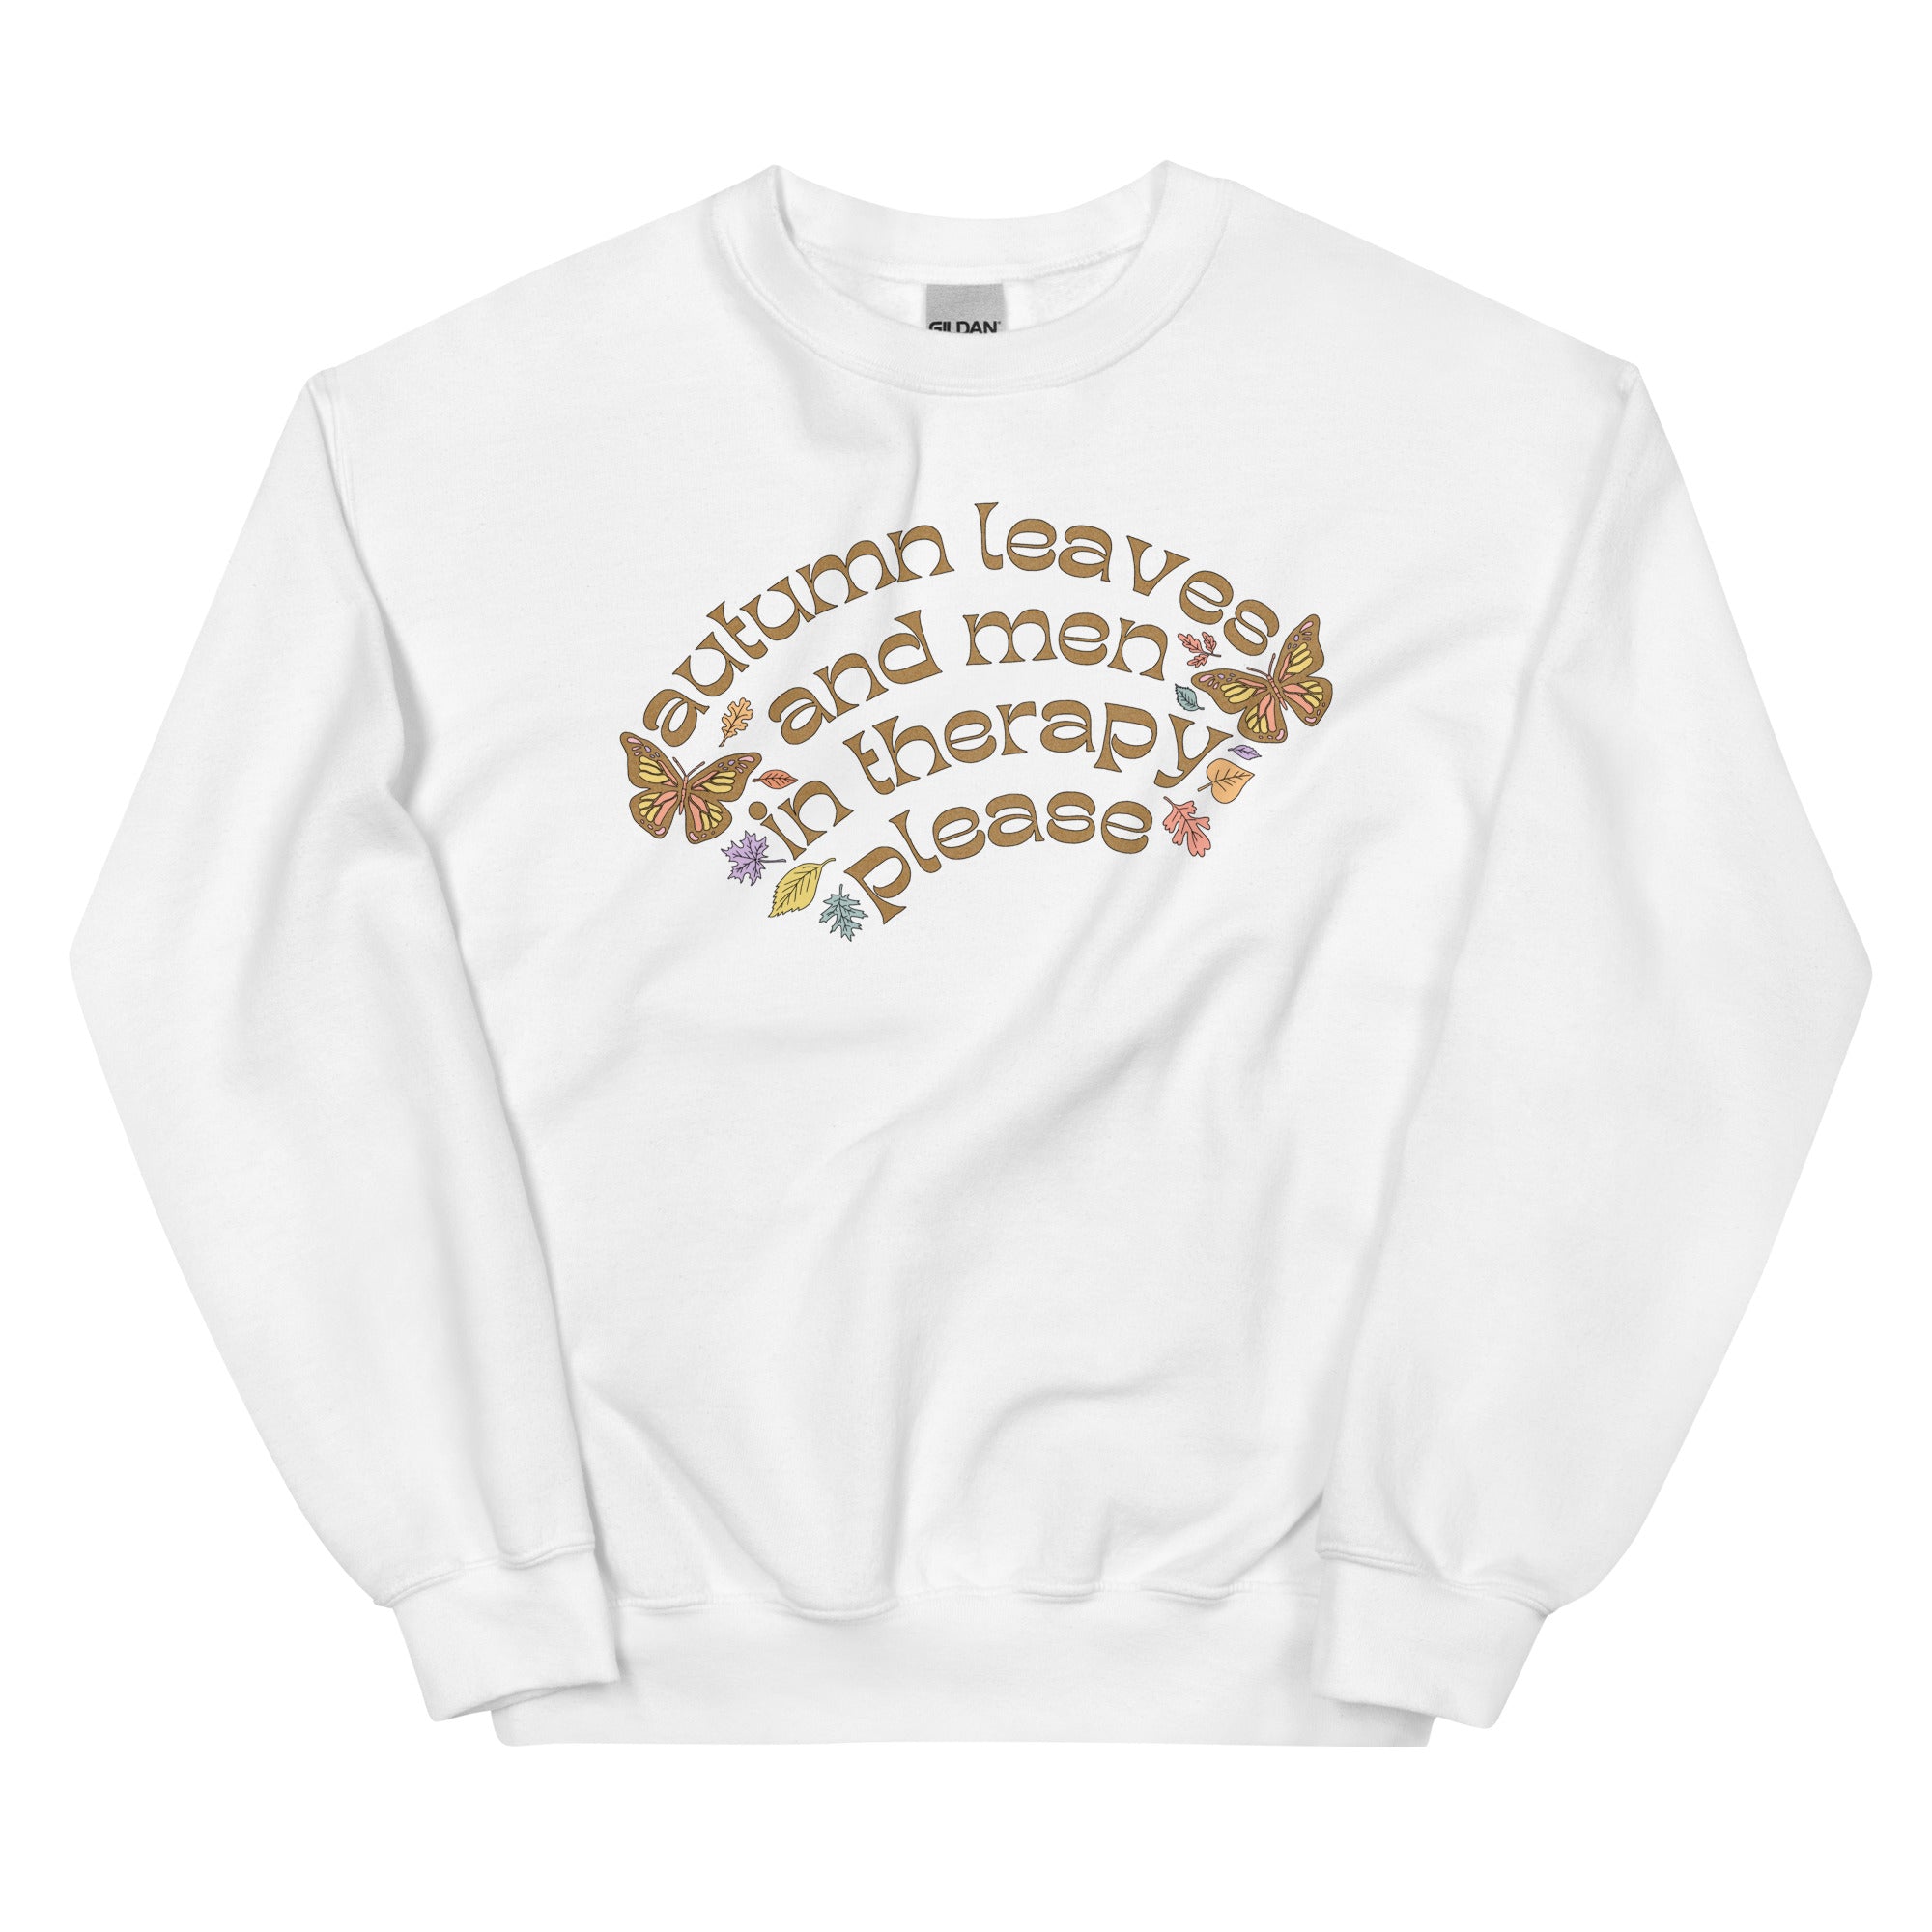 Autumn Leaves And Men In Therapy Please Unisex Feminist Sweatshirt - Shop Women’s Rights T-shirts - White Sweatshirt